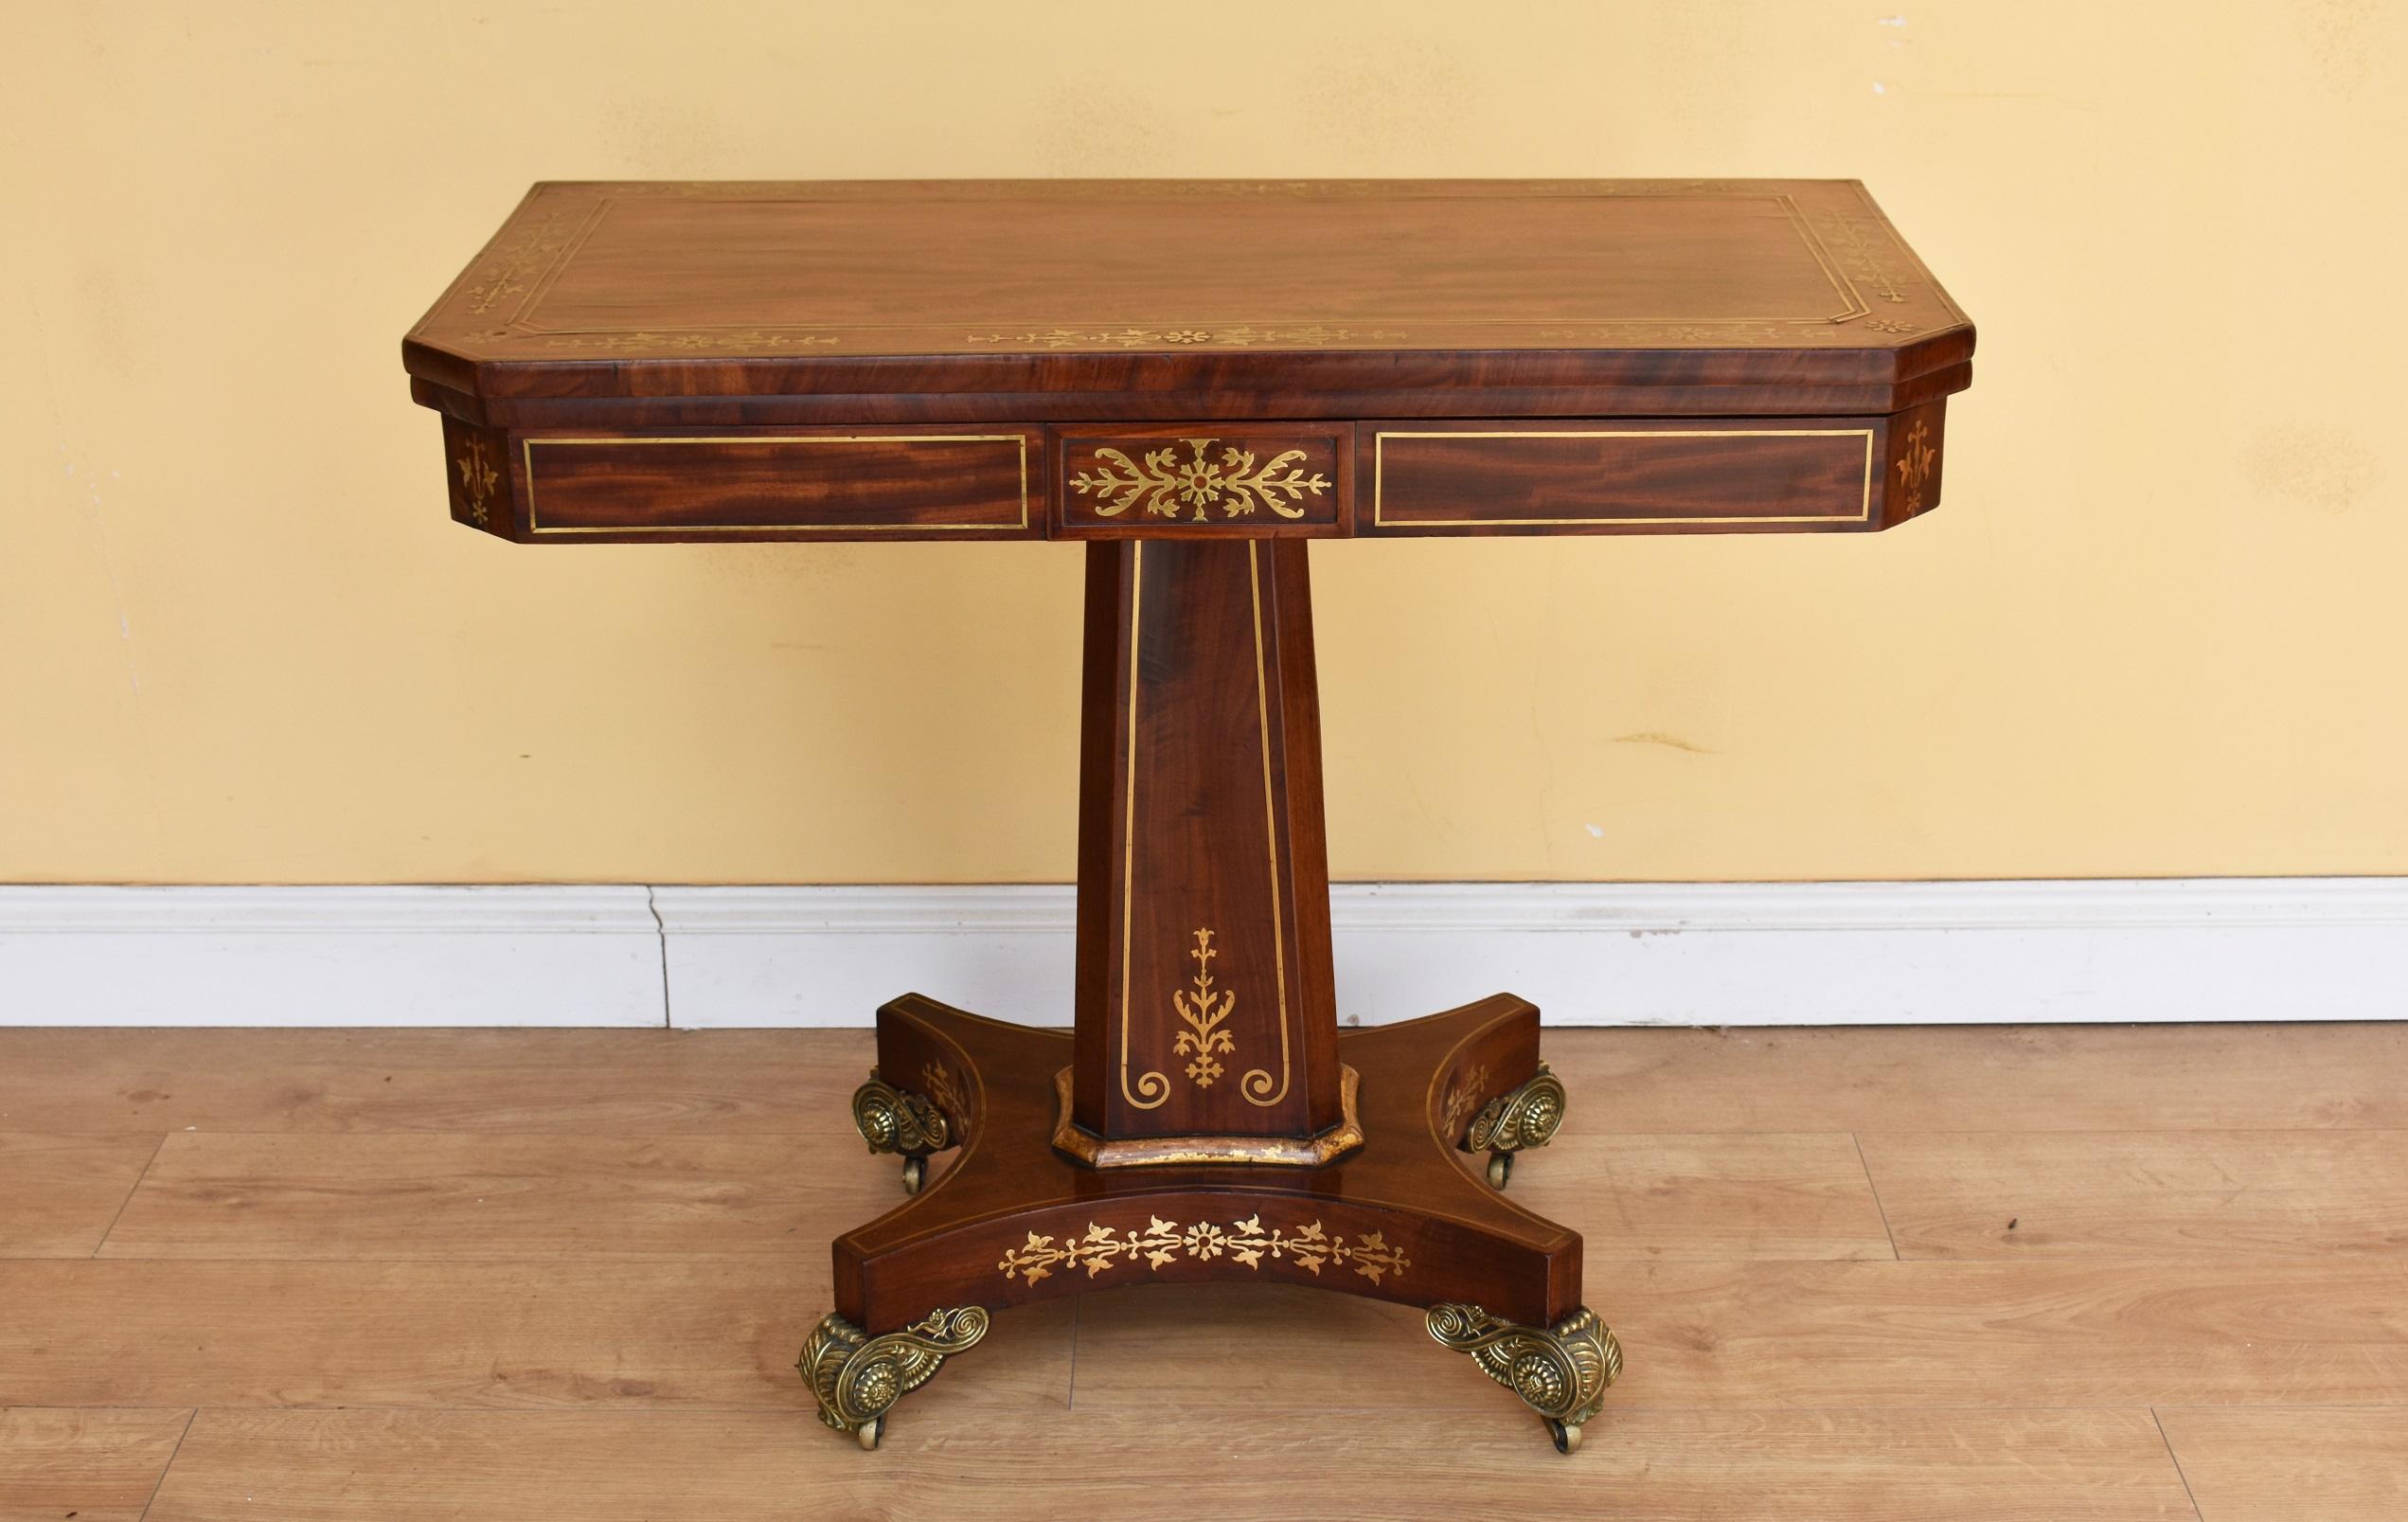 For sale is a good quality Regency rosewood and brass inlaid card table. The top is nicely inlaid and swivels to reveal storage space for cards etc. This then folds over to show a green baise above a flared column. The piece is raised on ornate